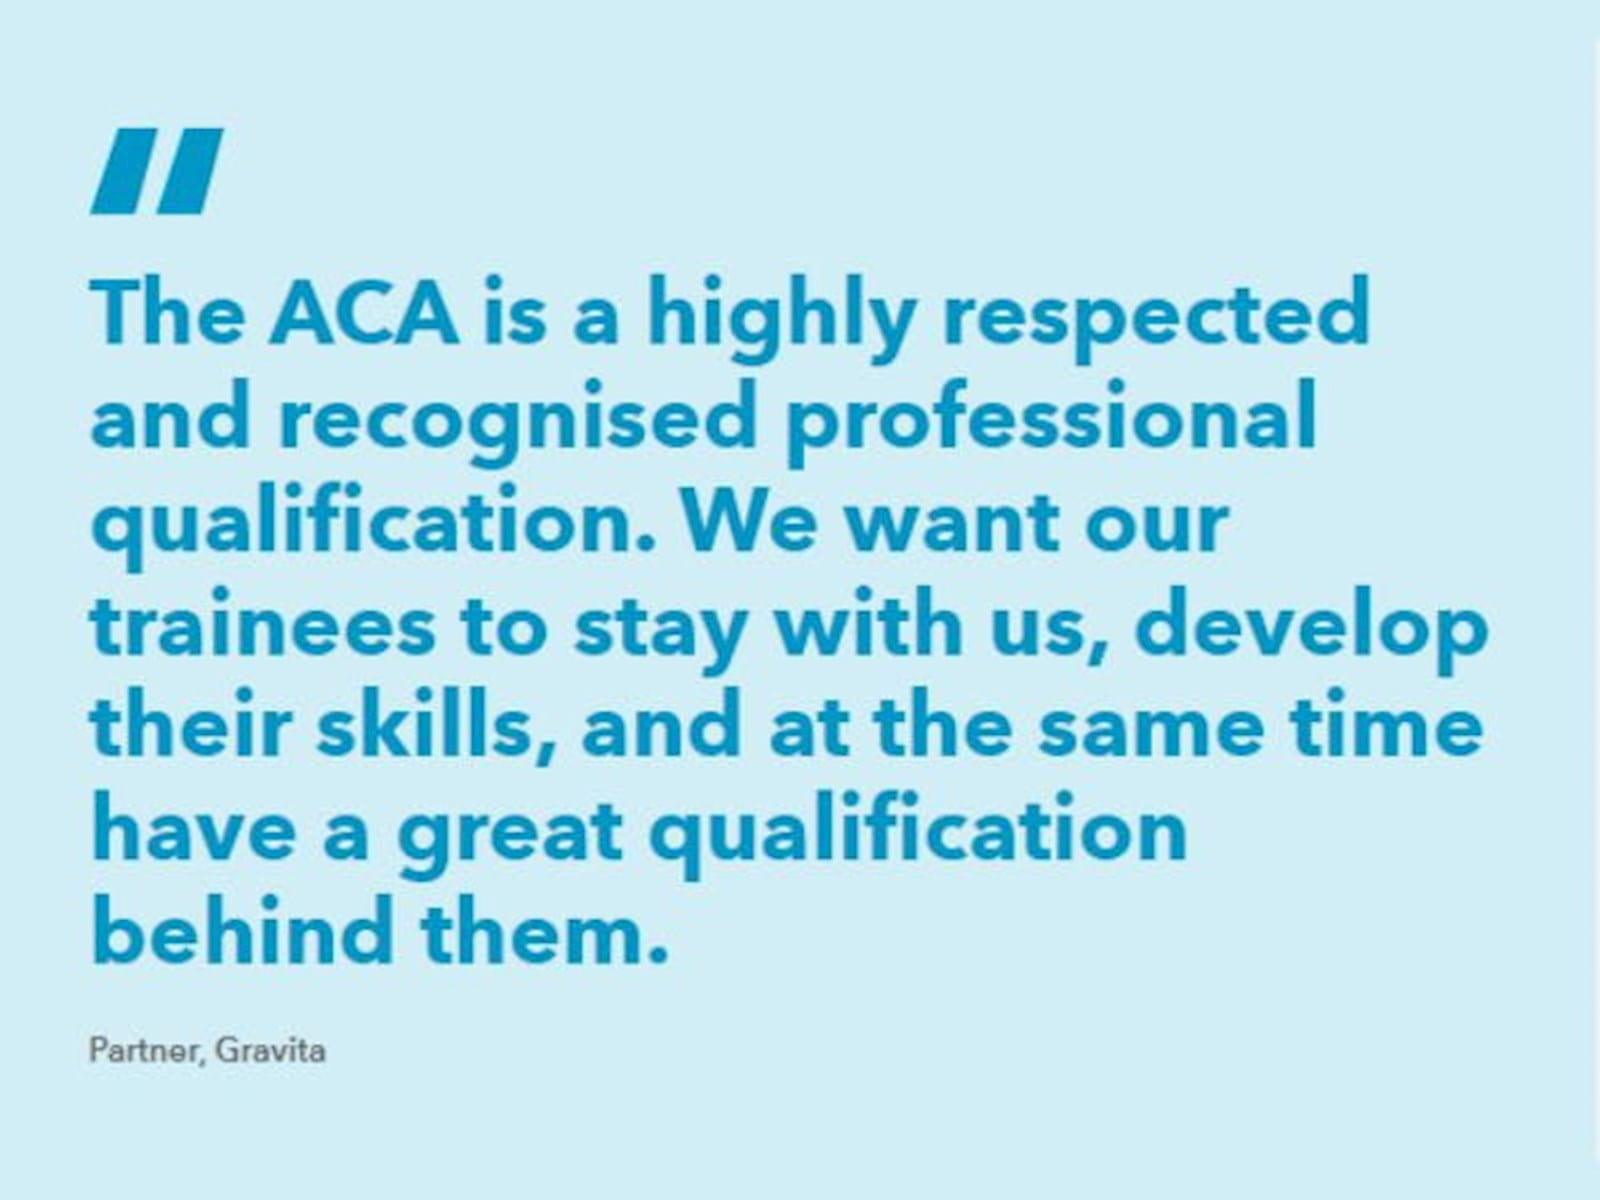 A quotation: "The ACA is a highly respected and recognised professional qualification. We want our trainees to stay with us, develop their skills, and at the same time have a great qualification behind them.” - Partner, Gravita